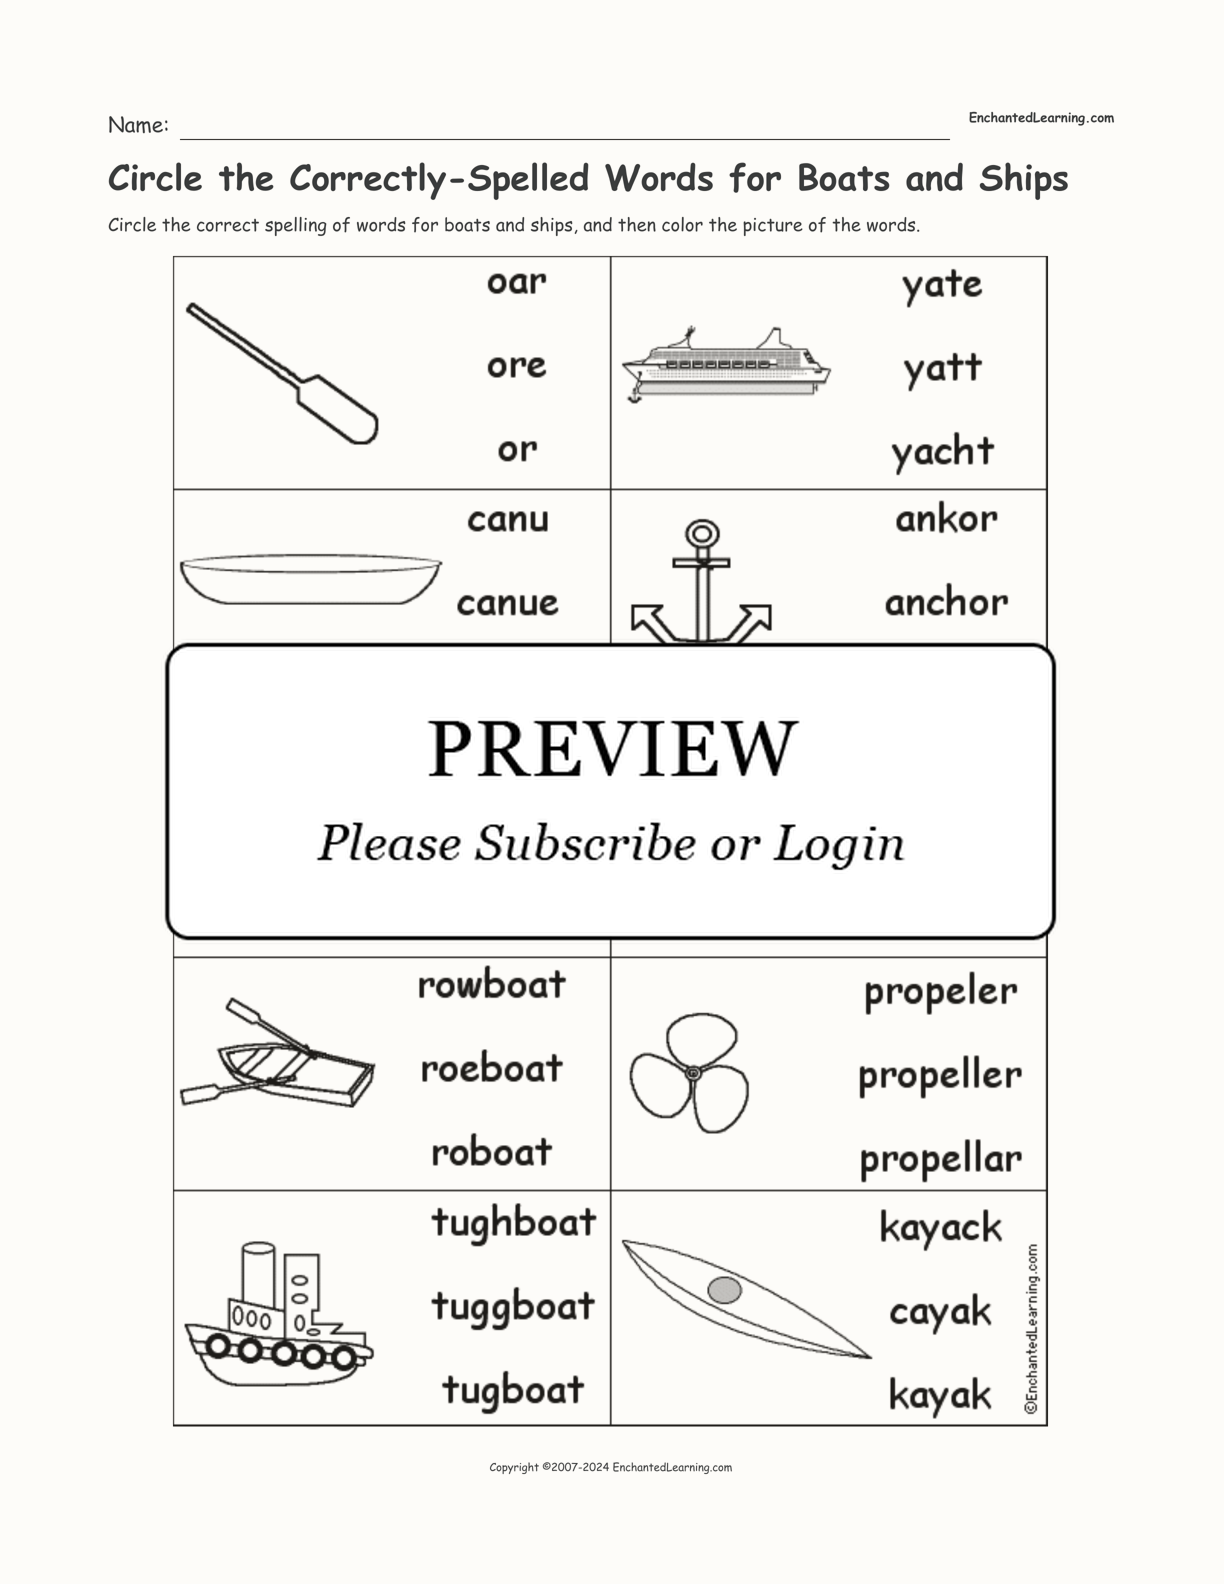 Circle the Correctly-Spelled Words for Boats and Ships interactive worksheet page 1